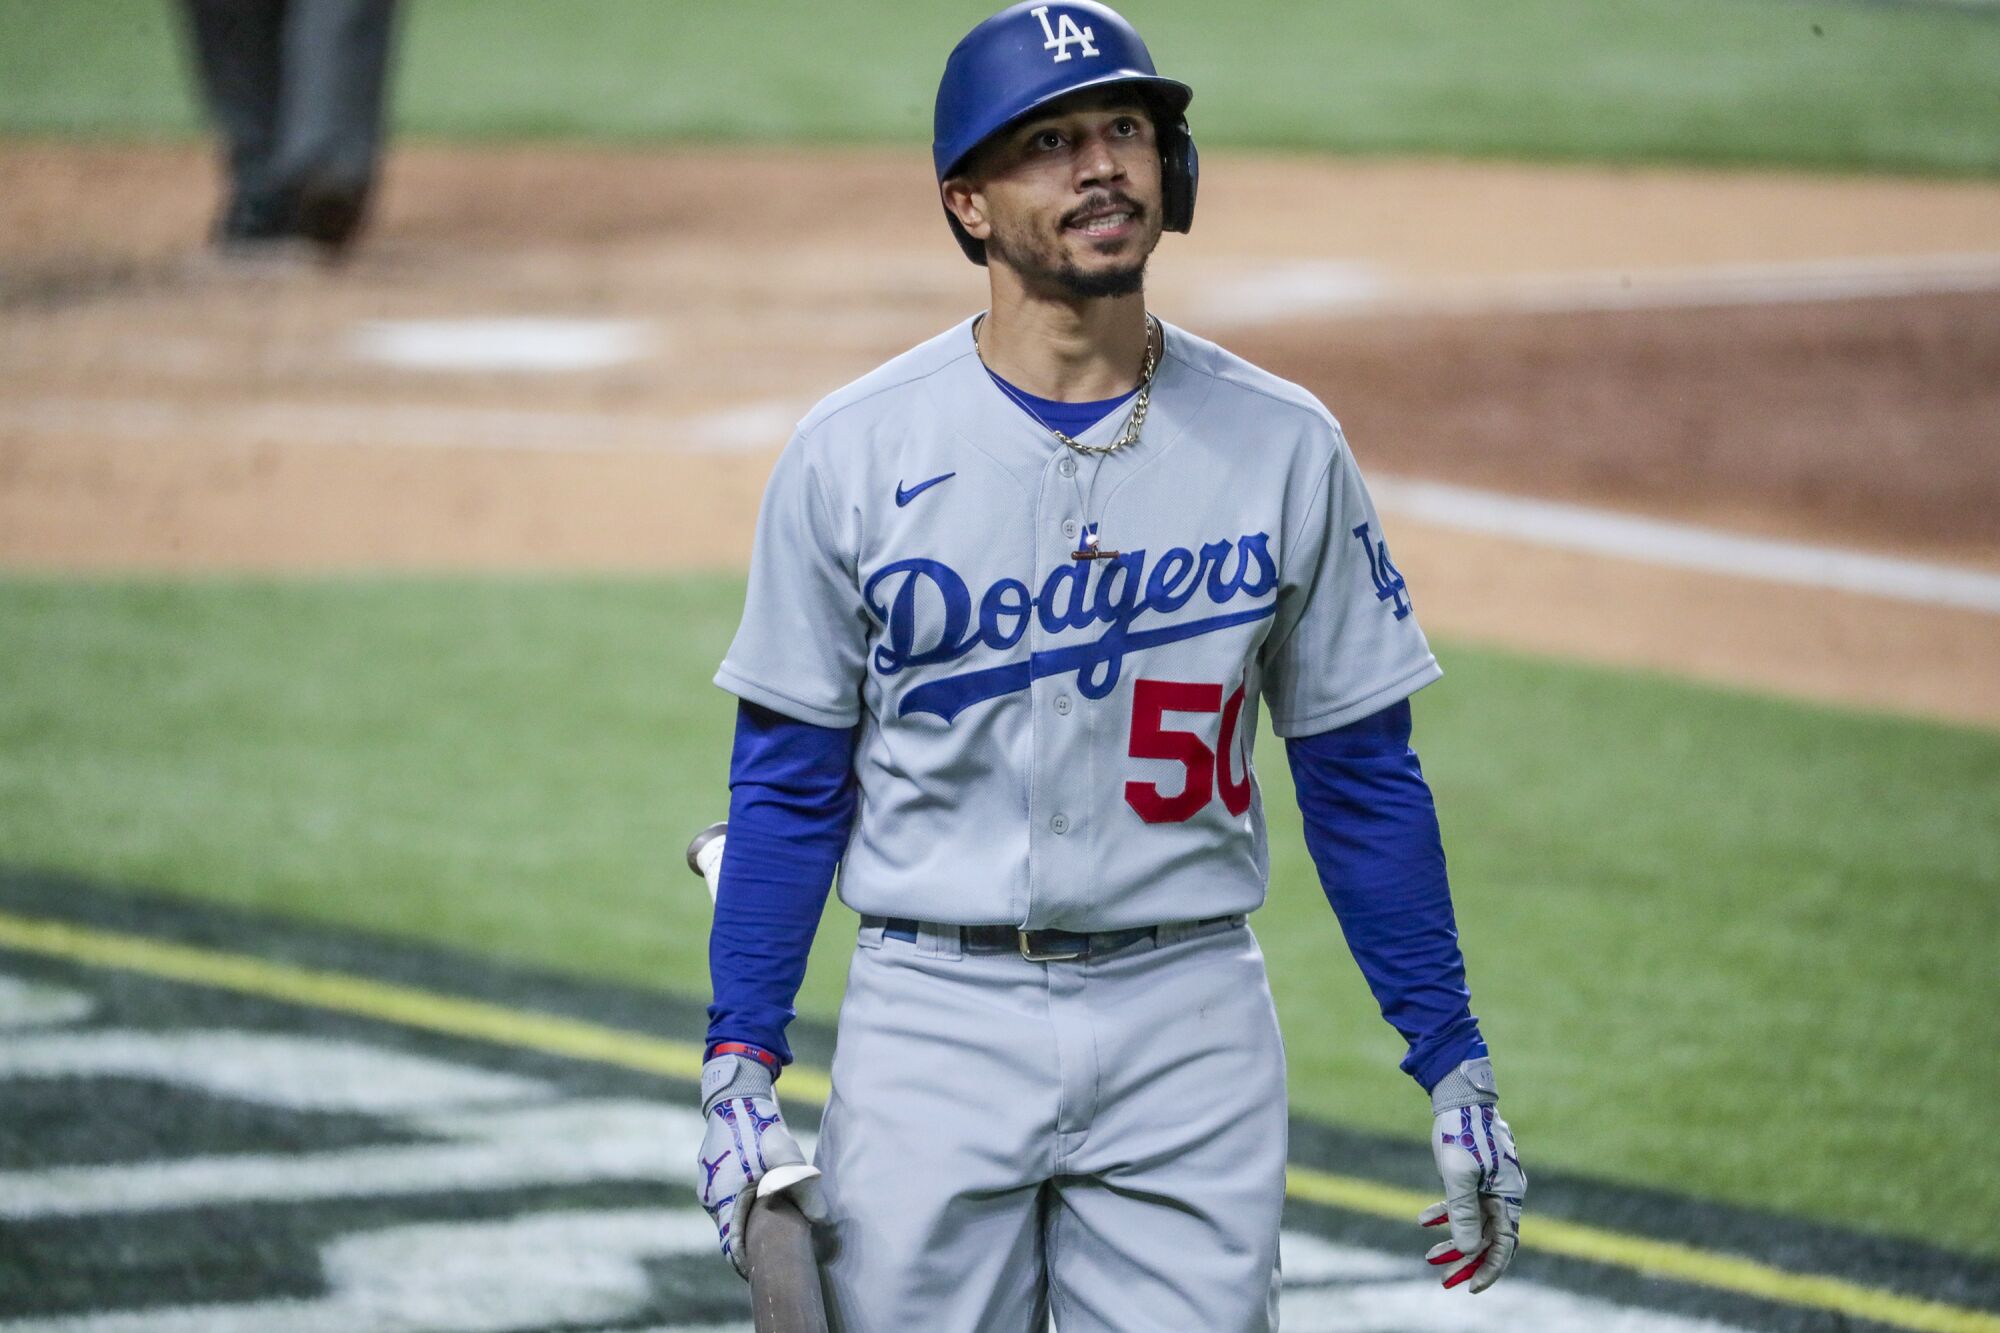 Dodgers right fielder Mookie Betts reacts after striking out in the third inning.